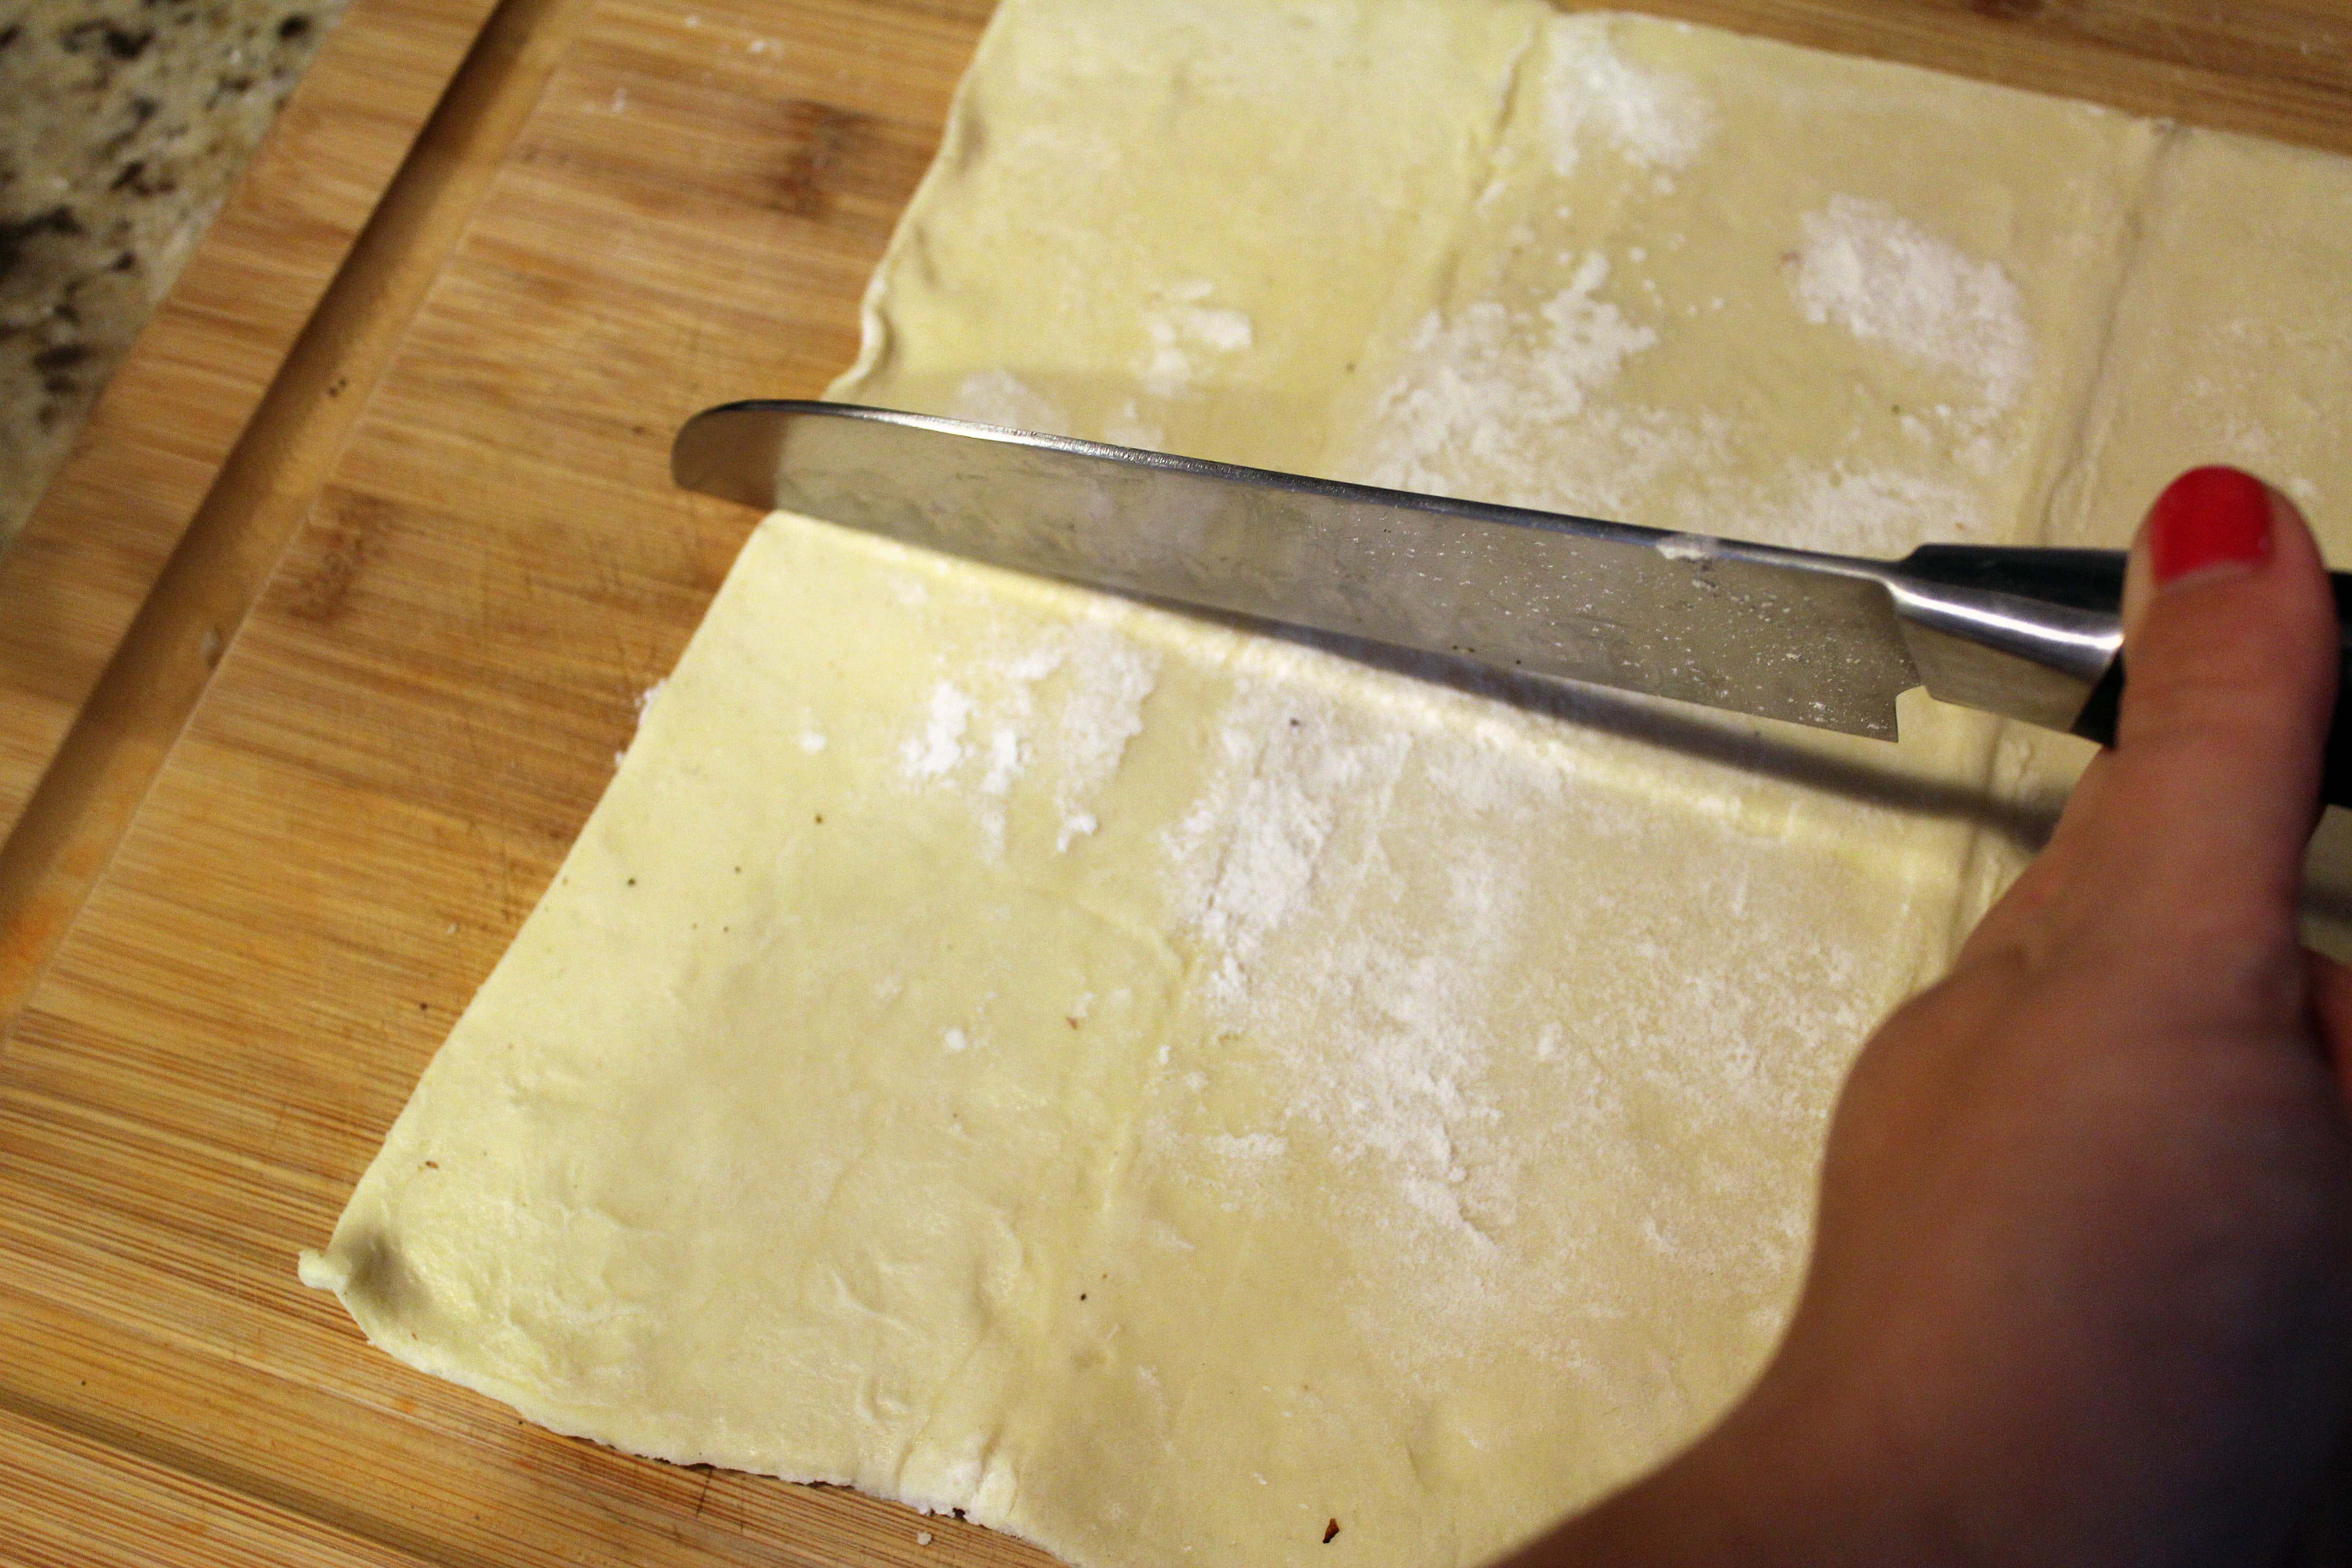 Cut dough in half lengthwise